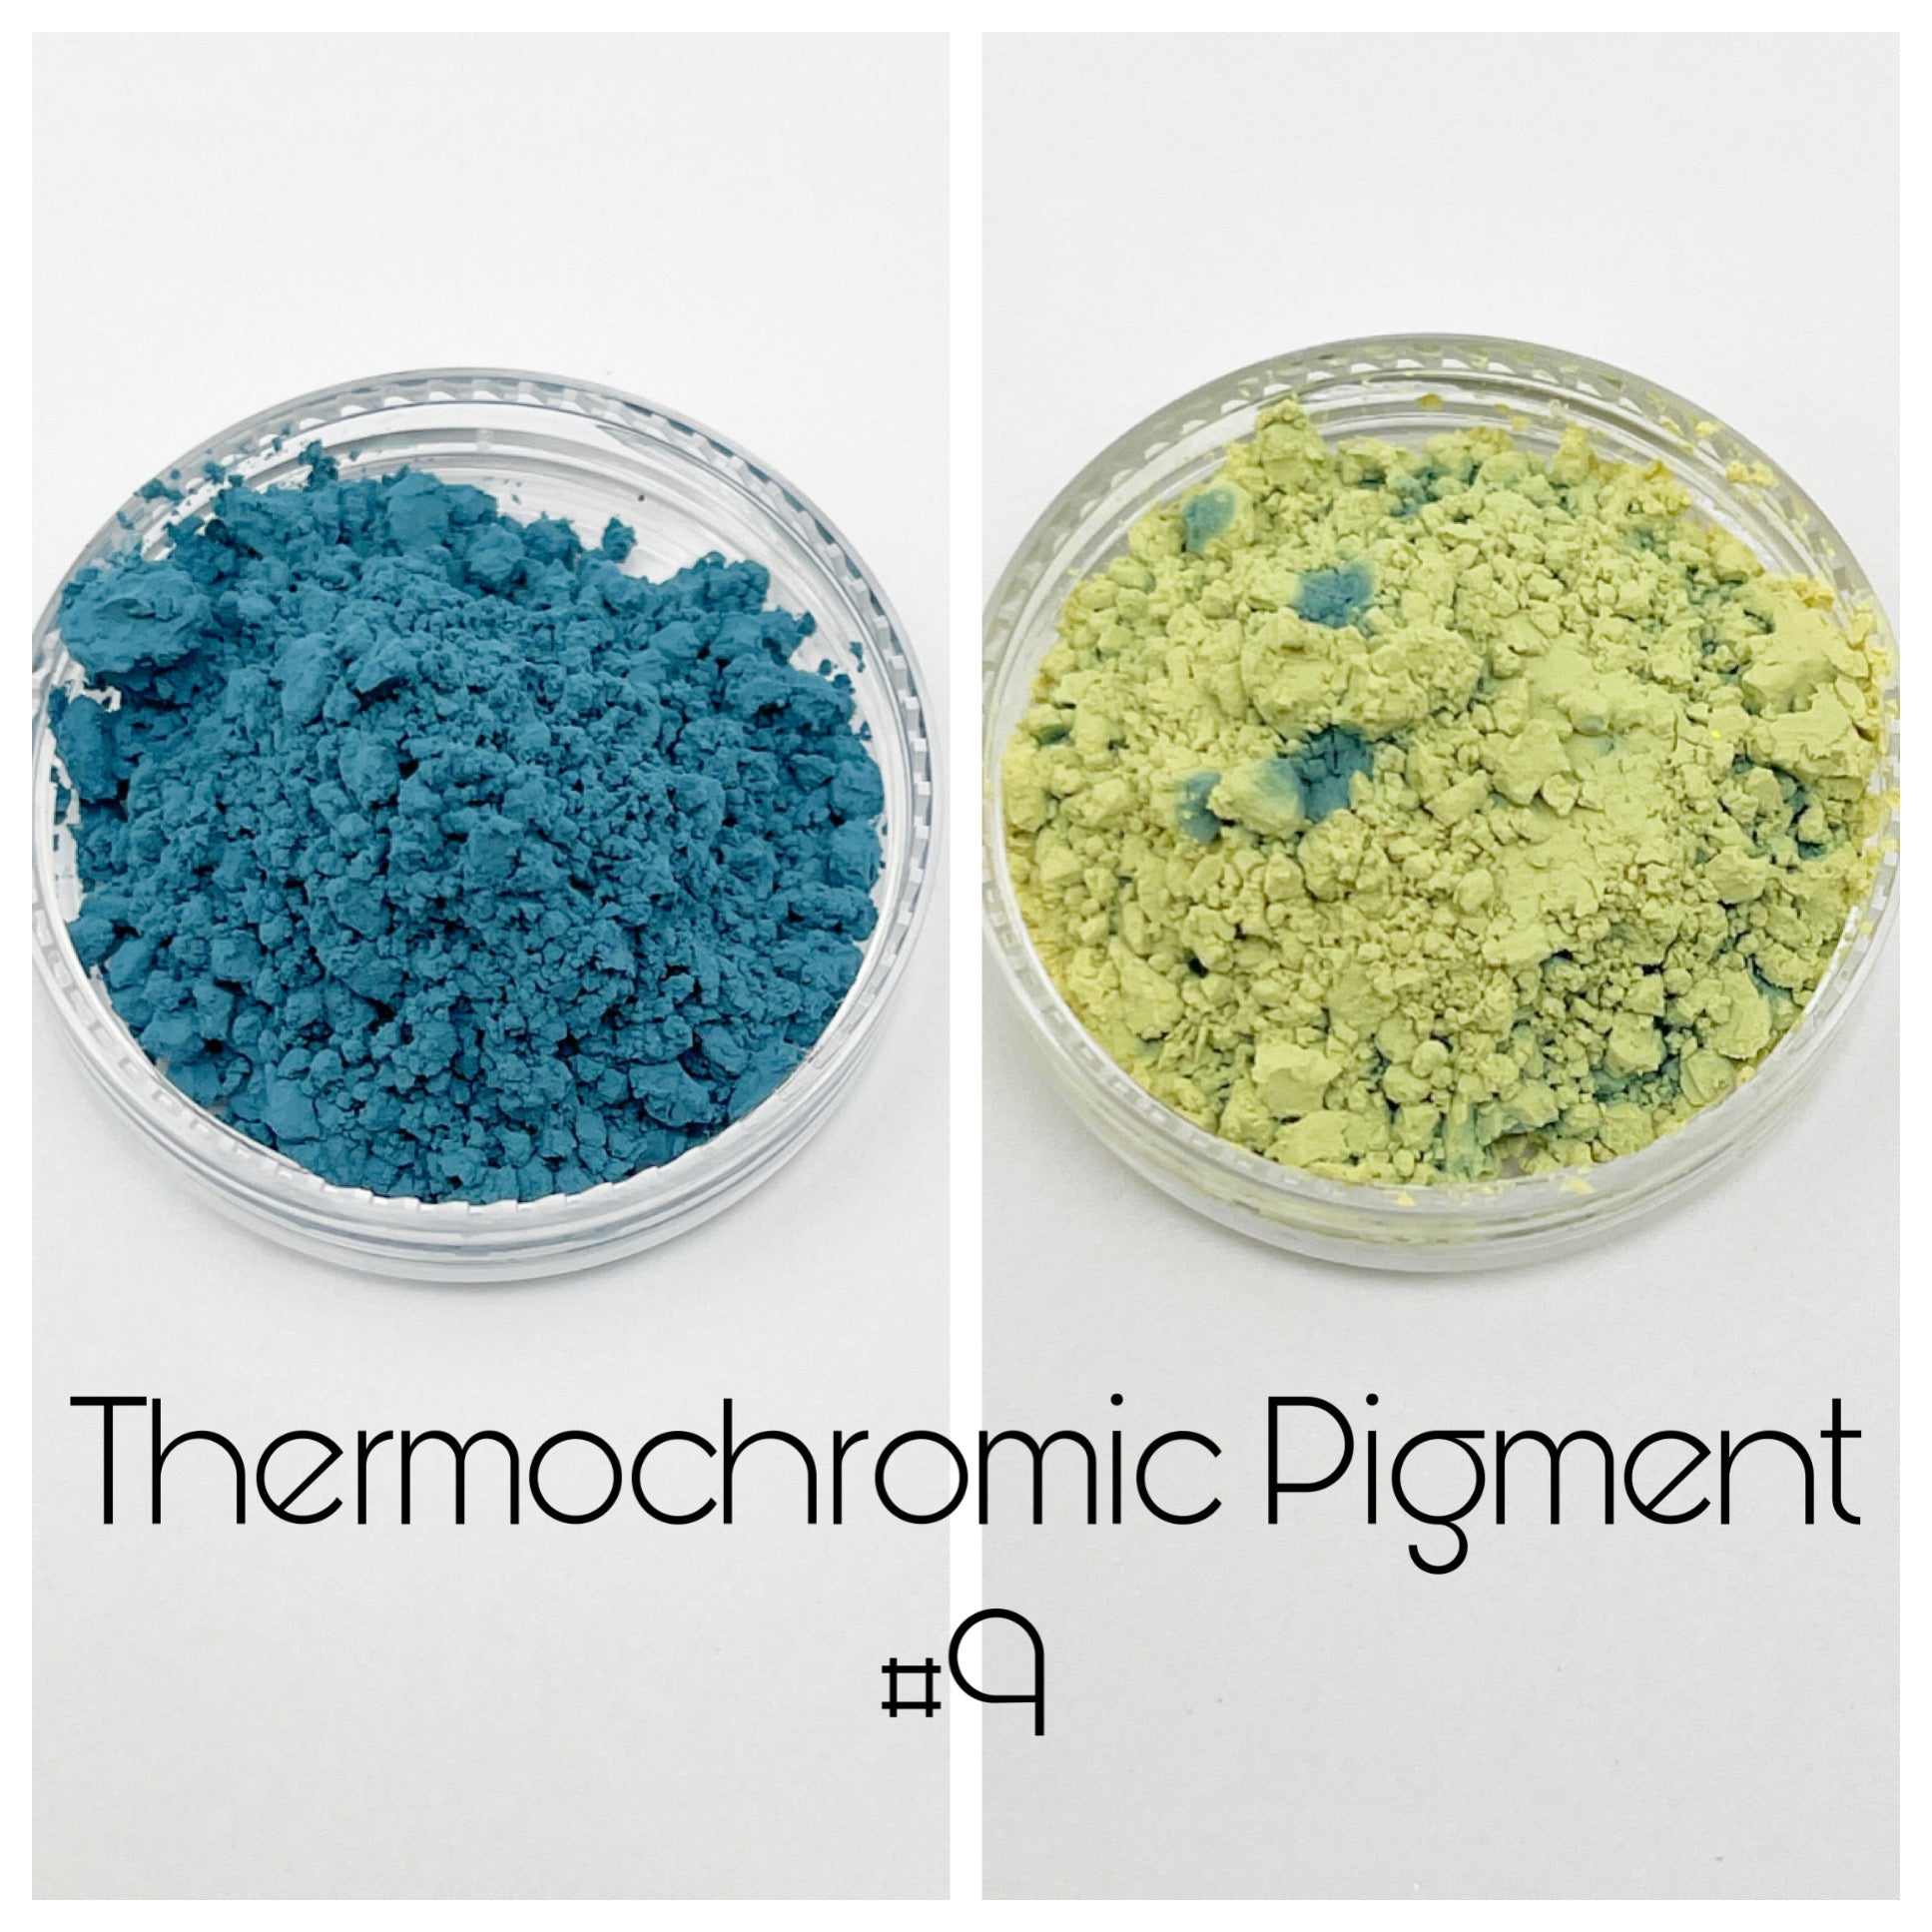 G0450 Thermochromic Pigment 09 Green To Yellow Heat Sensitive